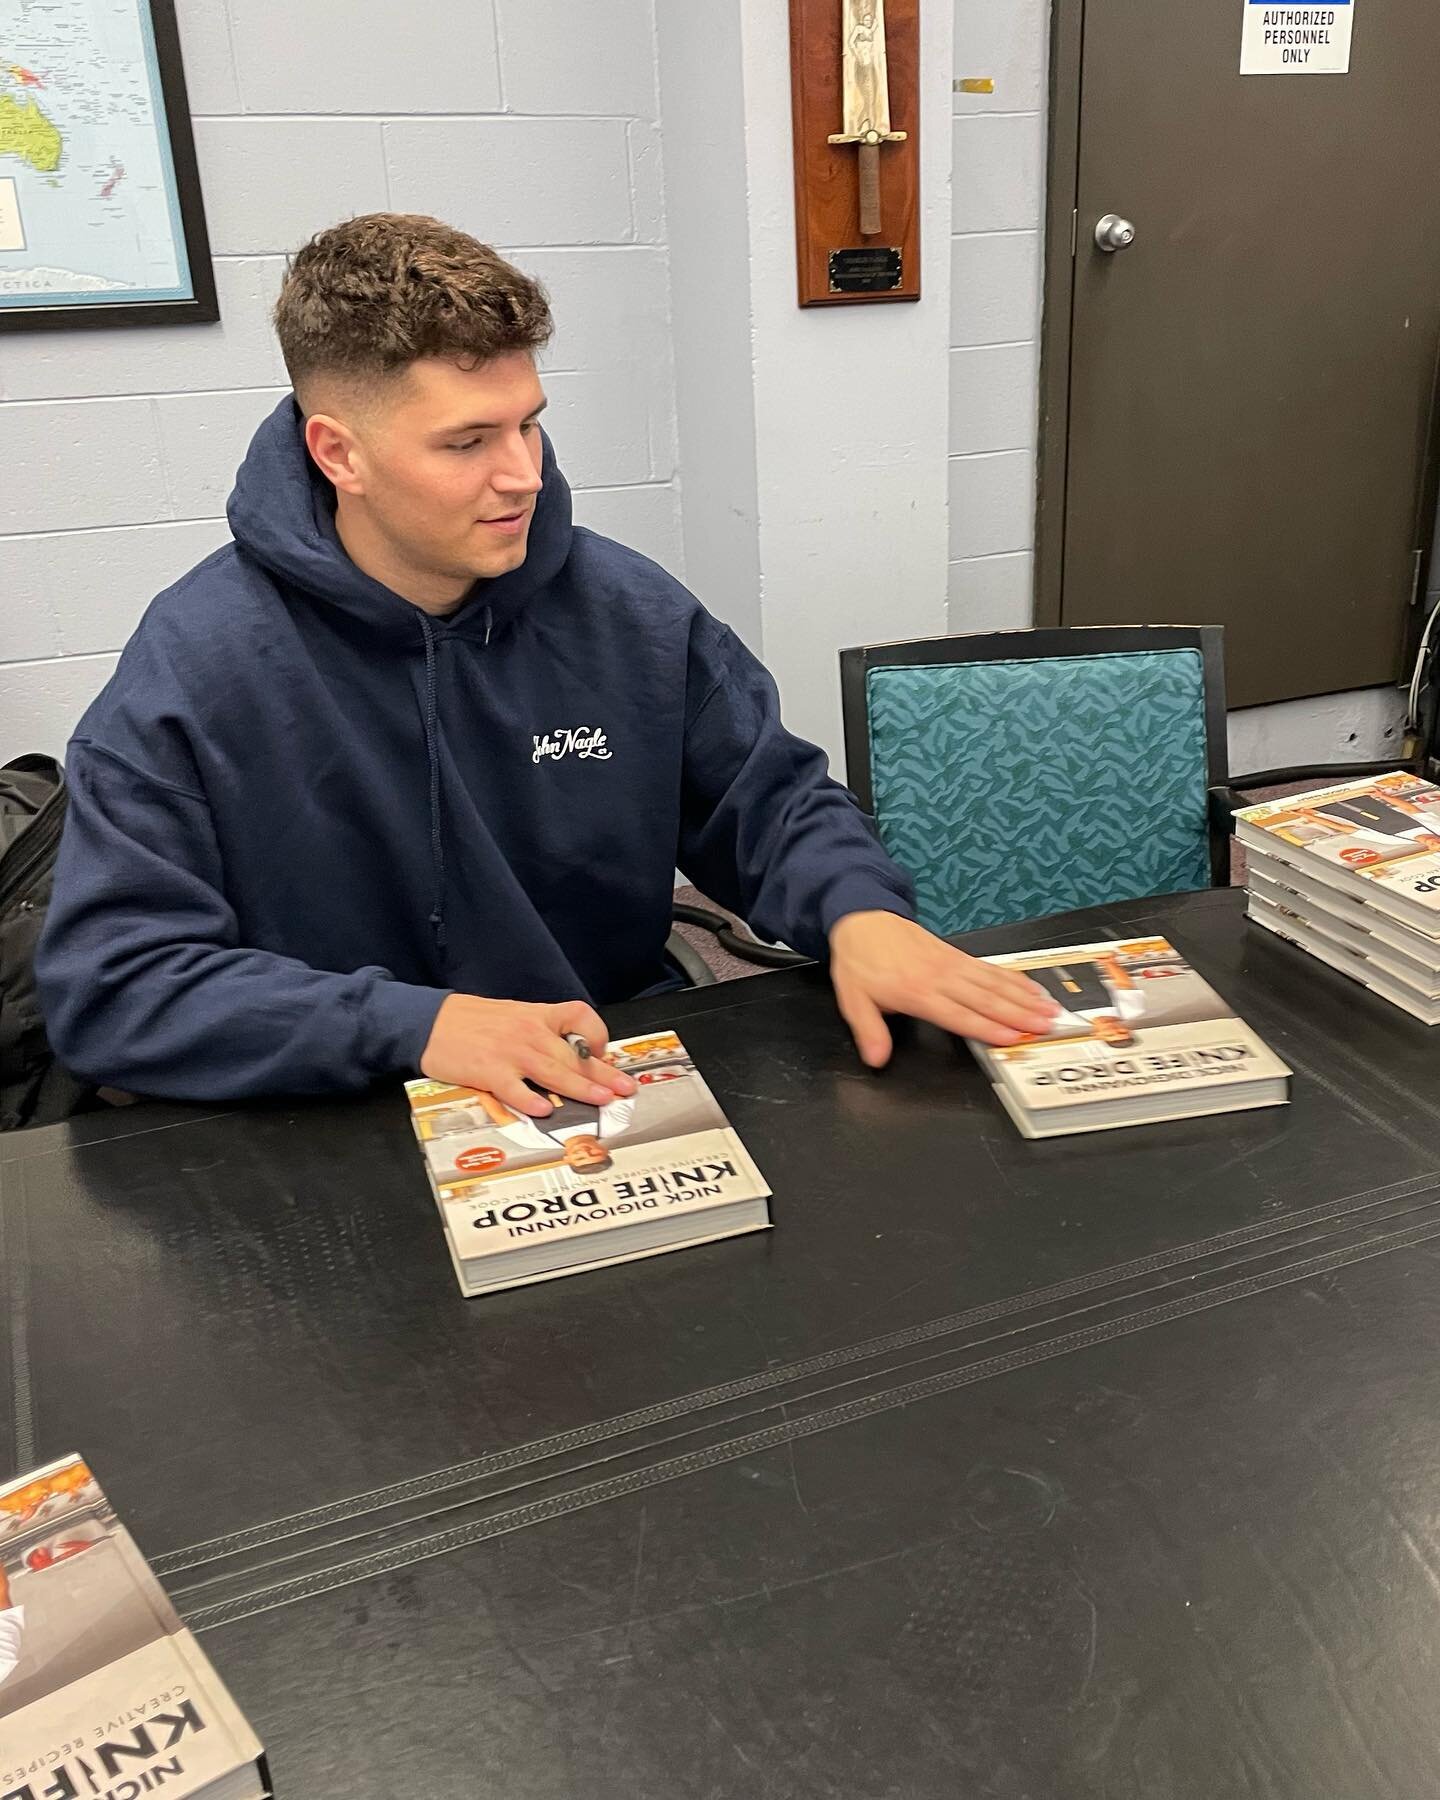 📣🎄Holiday Raffle Alert! 🎄📣
 
Our friend @nick.digiovanni stopped by our office last week to sign a few copies of his @nytbooks best seller &ldquo;Knife Drop&rdquo; for us and our seafood friends.

In order to be entered in a chance to win a signe